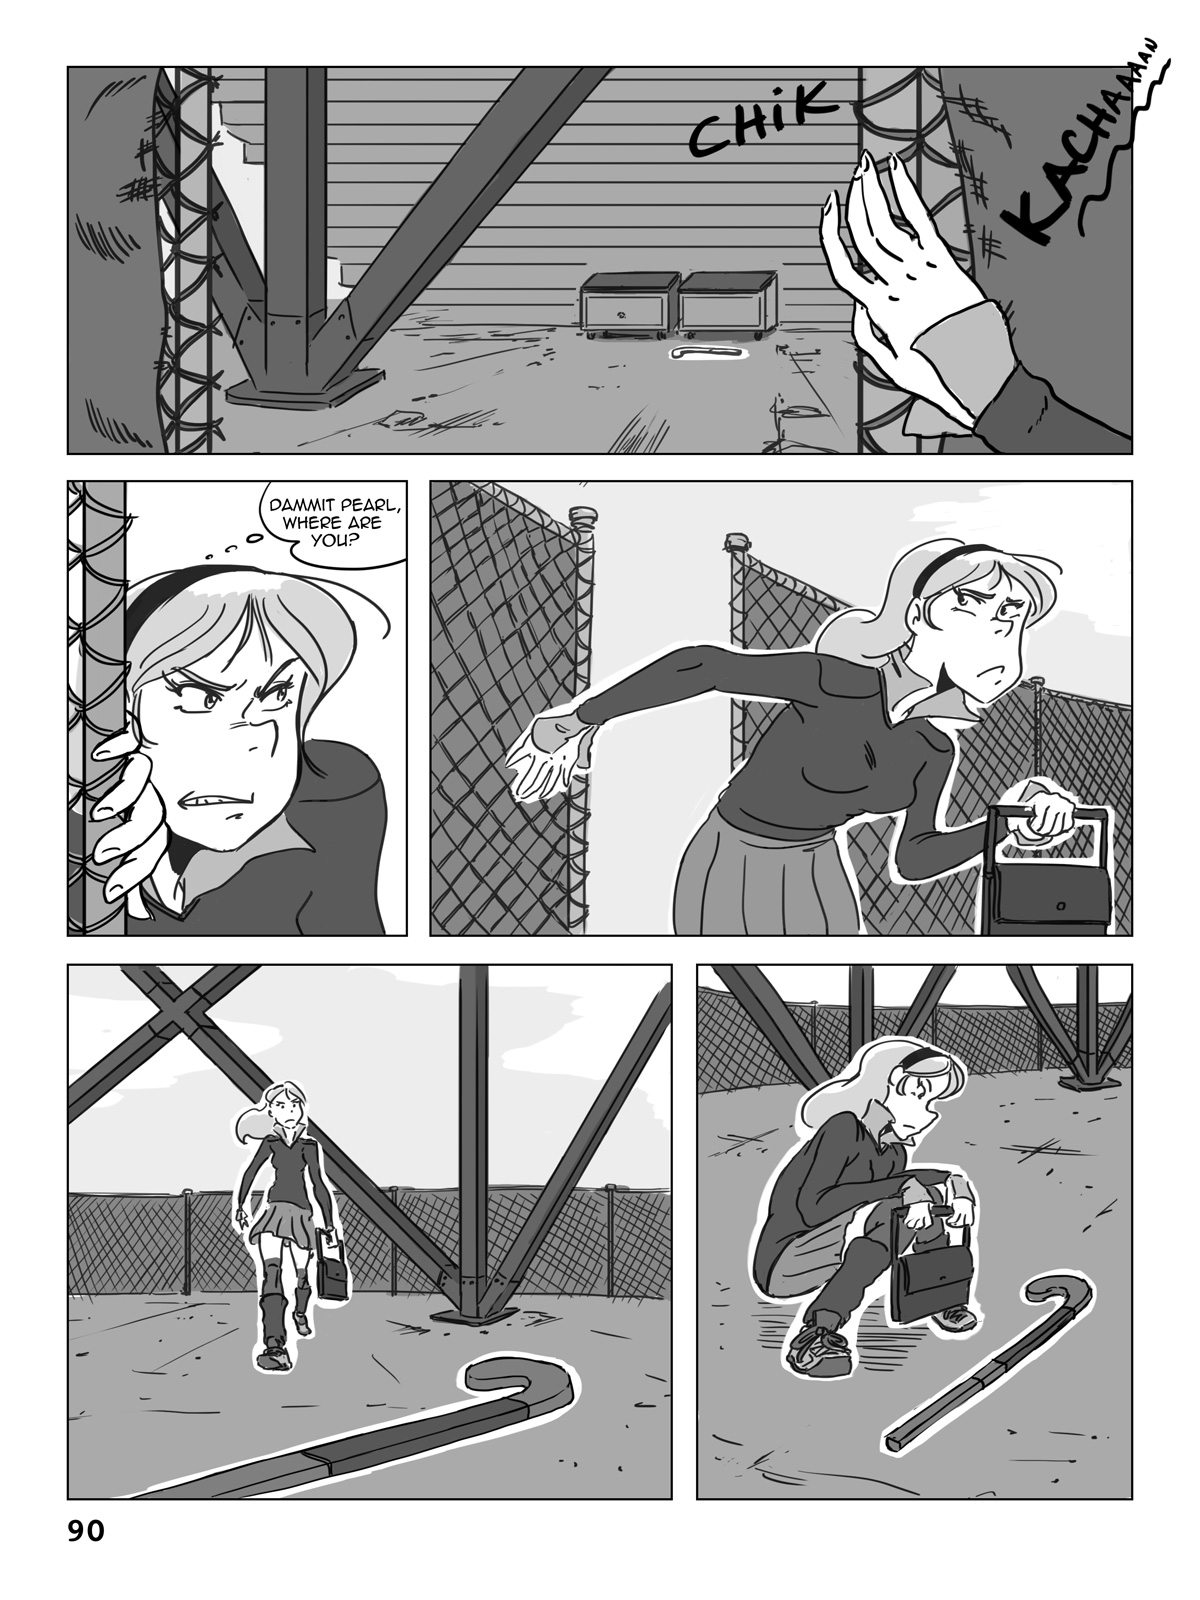 Hockey, Love, & GUTS! – Chapter 5 – Page 90